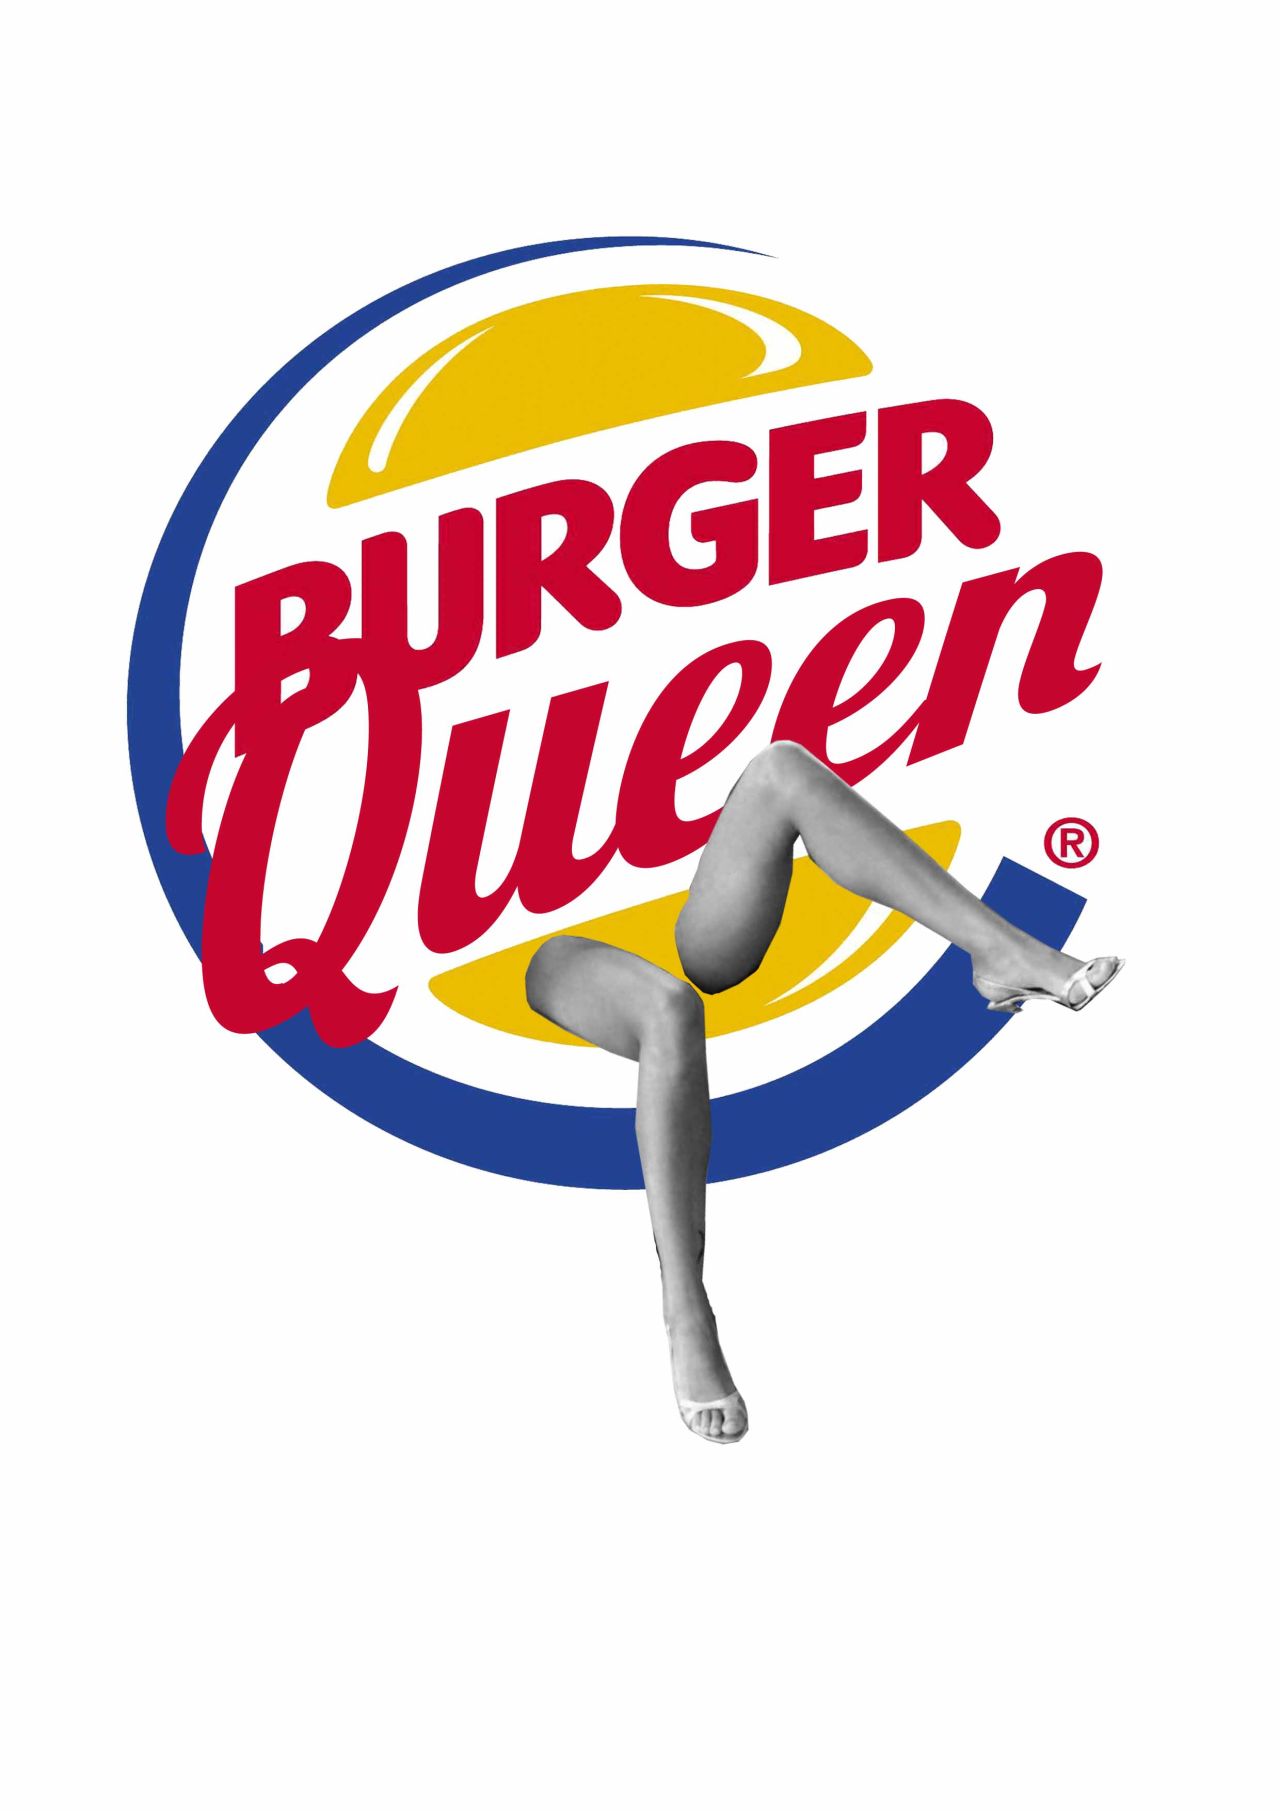 Like some of Warhol's work, Ebami's 2012 piece "Burger Queen" takes inspiration from the logo of a consumer product.